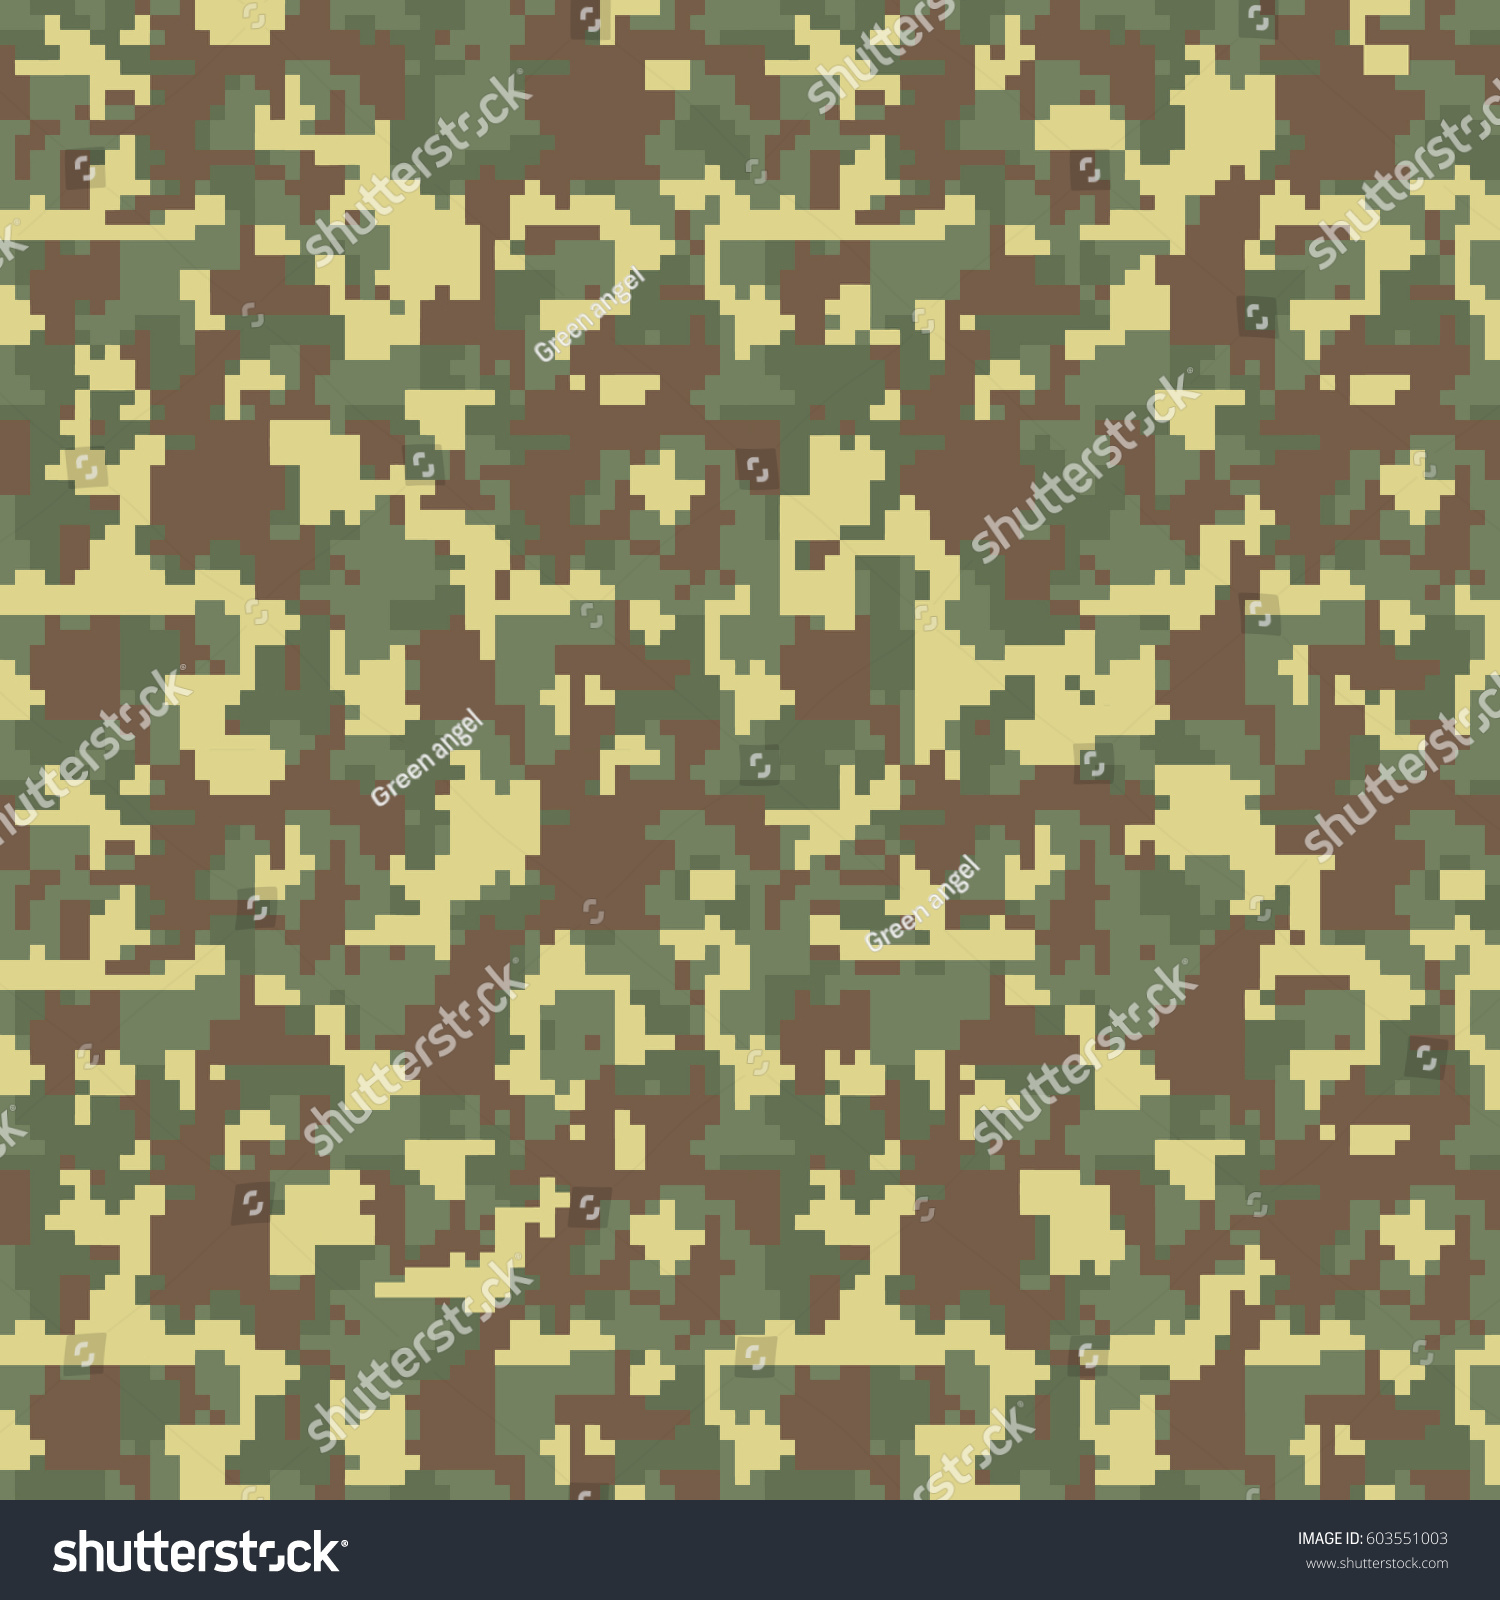 Pixel Camo Seamless Camouflage Pattern Military Stock Vector (Royalty ...